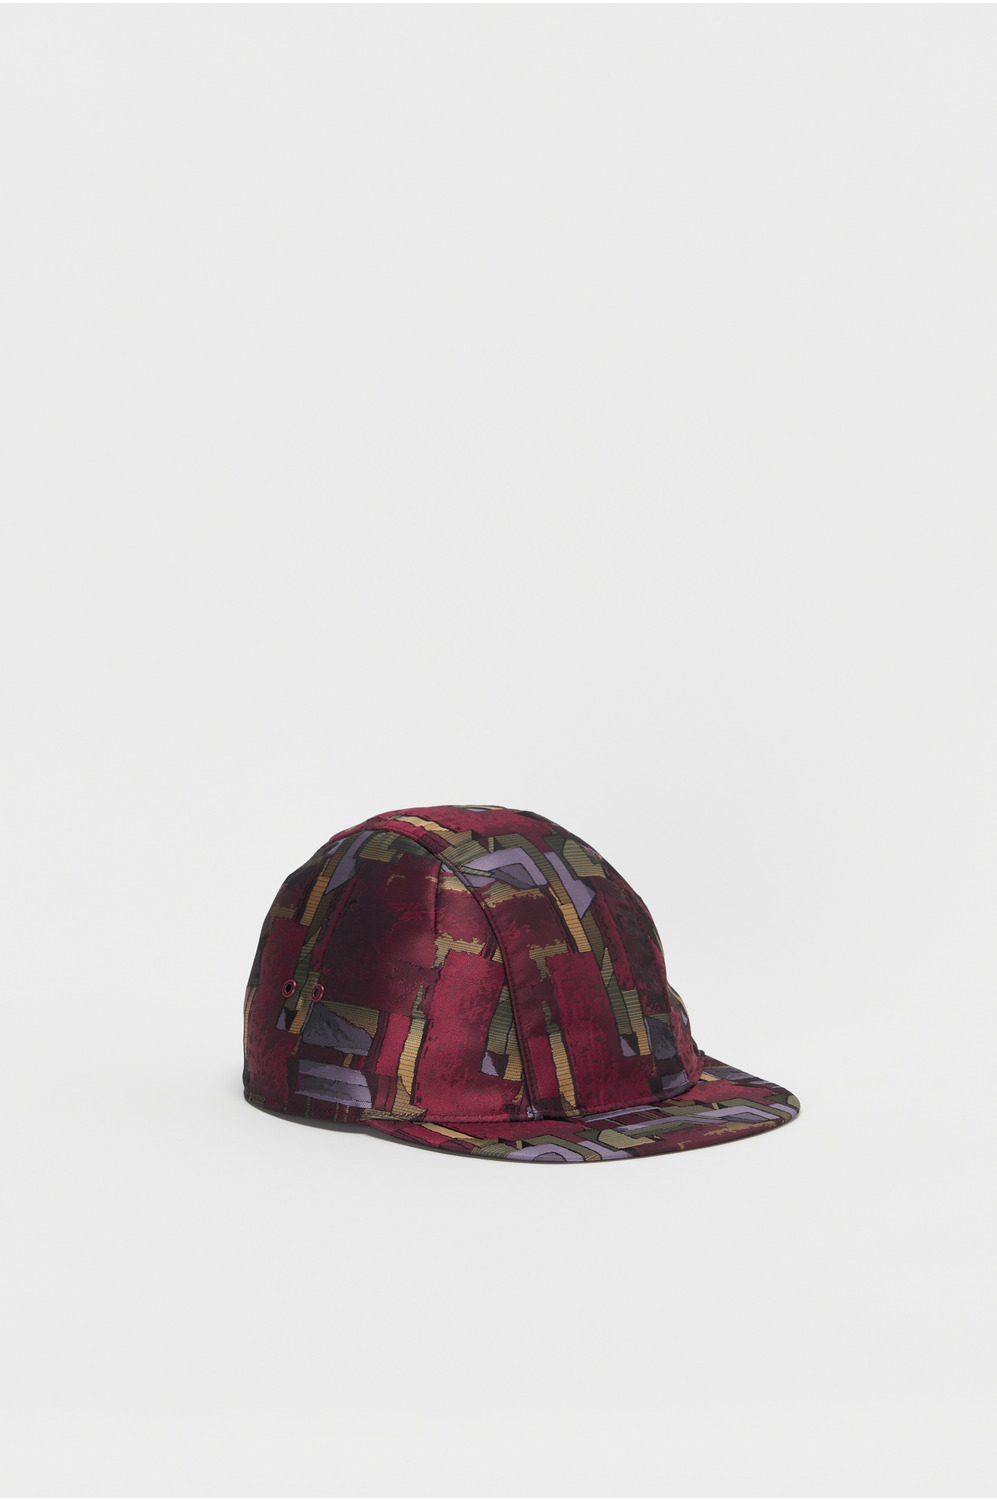 cycle cap 詳細画像 abstract burgundy 1